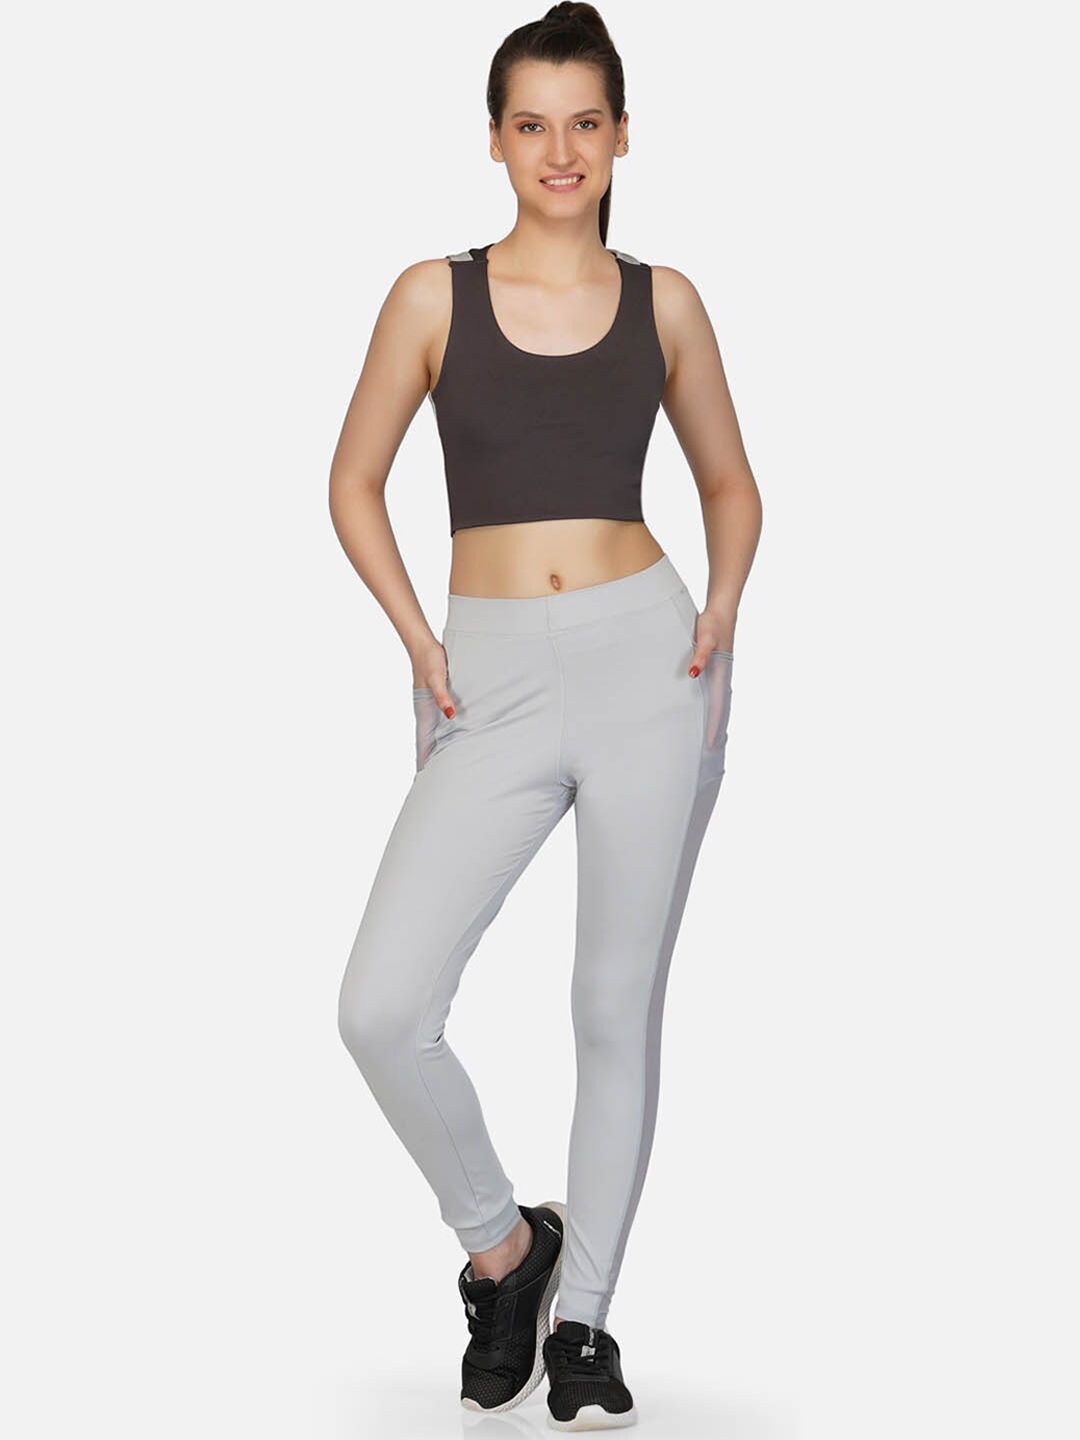 IMPERATIVE Women Grey Solid 2 Piece Workout Set Price in India